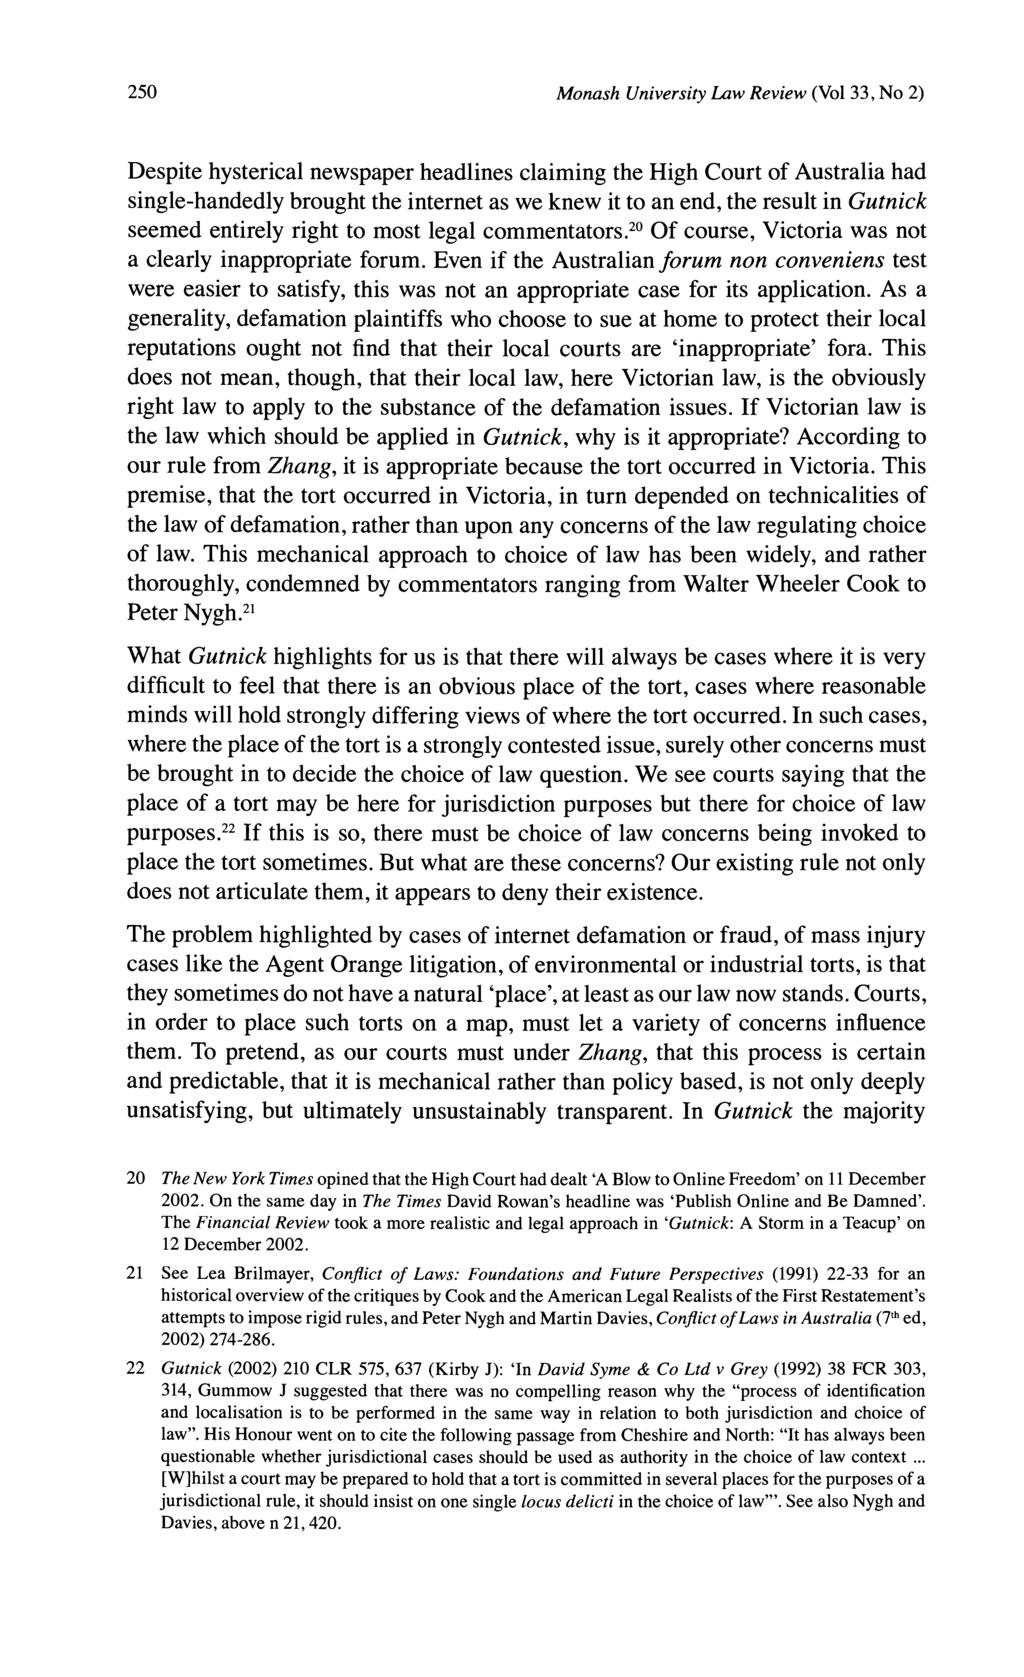 250 Monash University Law Review (Vol33, No 2) Despite hysterical newspaper headlines claiming the High Court of Australia had single-handedly brought the internet as we knew it to an end, the result